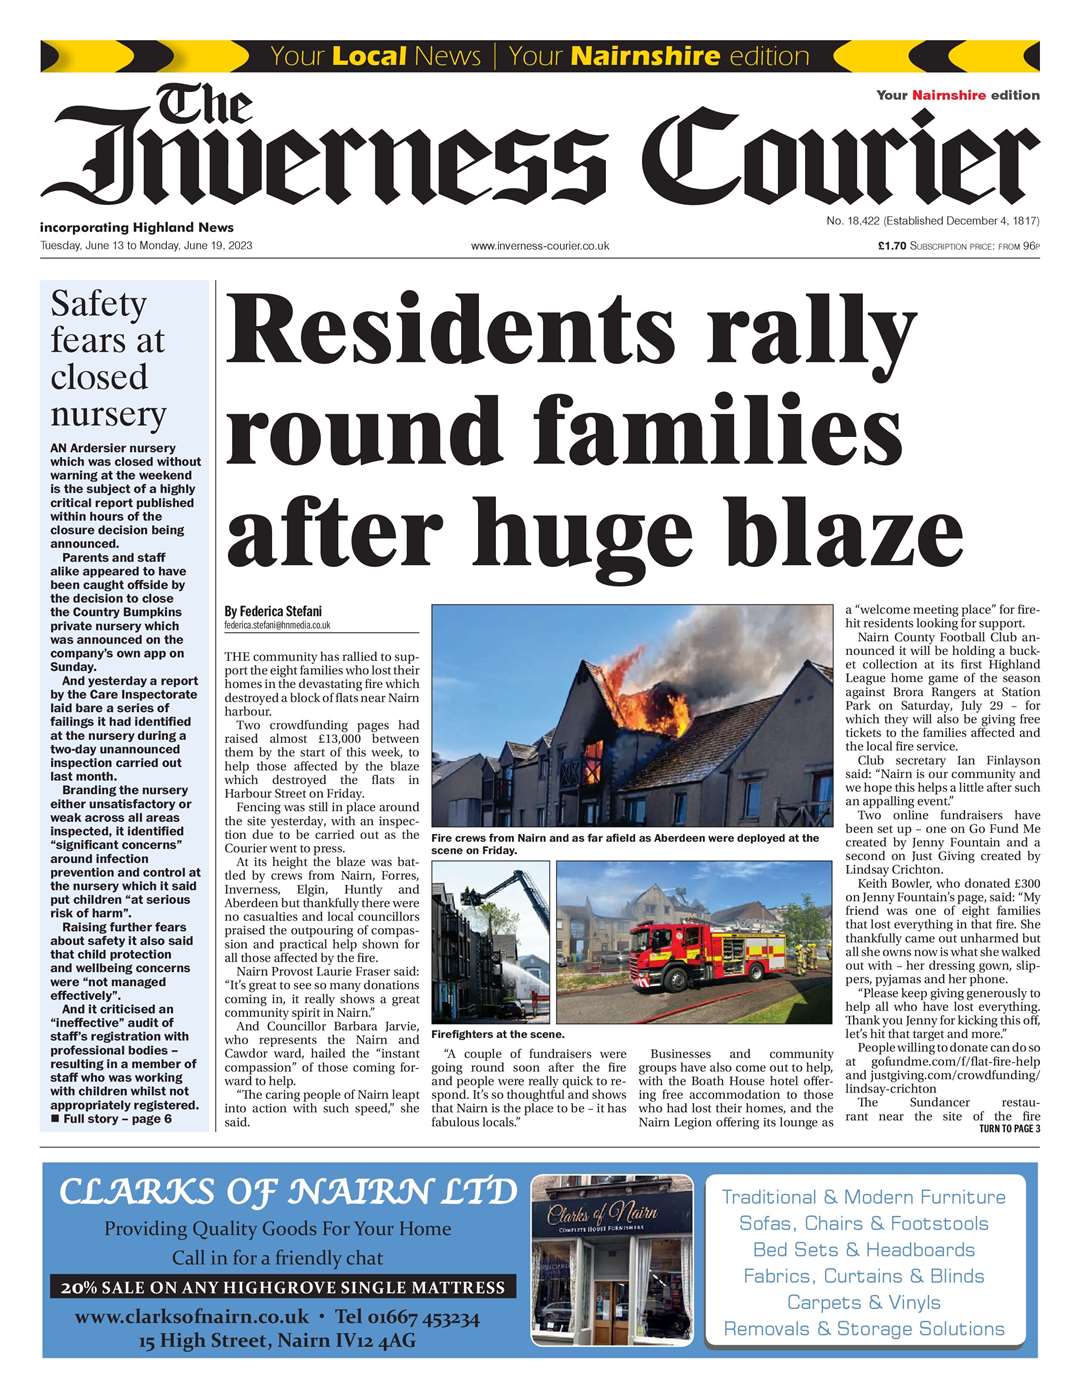 The Inverness Courier (Nairnshire edition), June 13, front page.